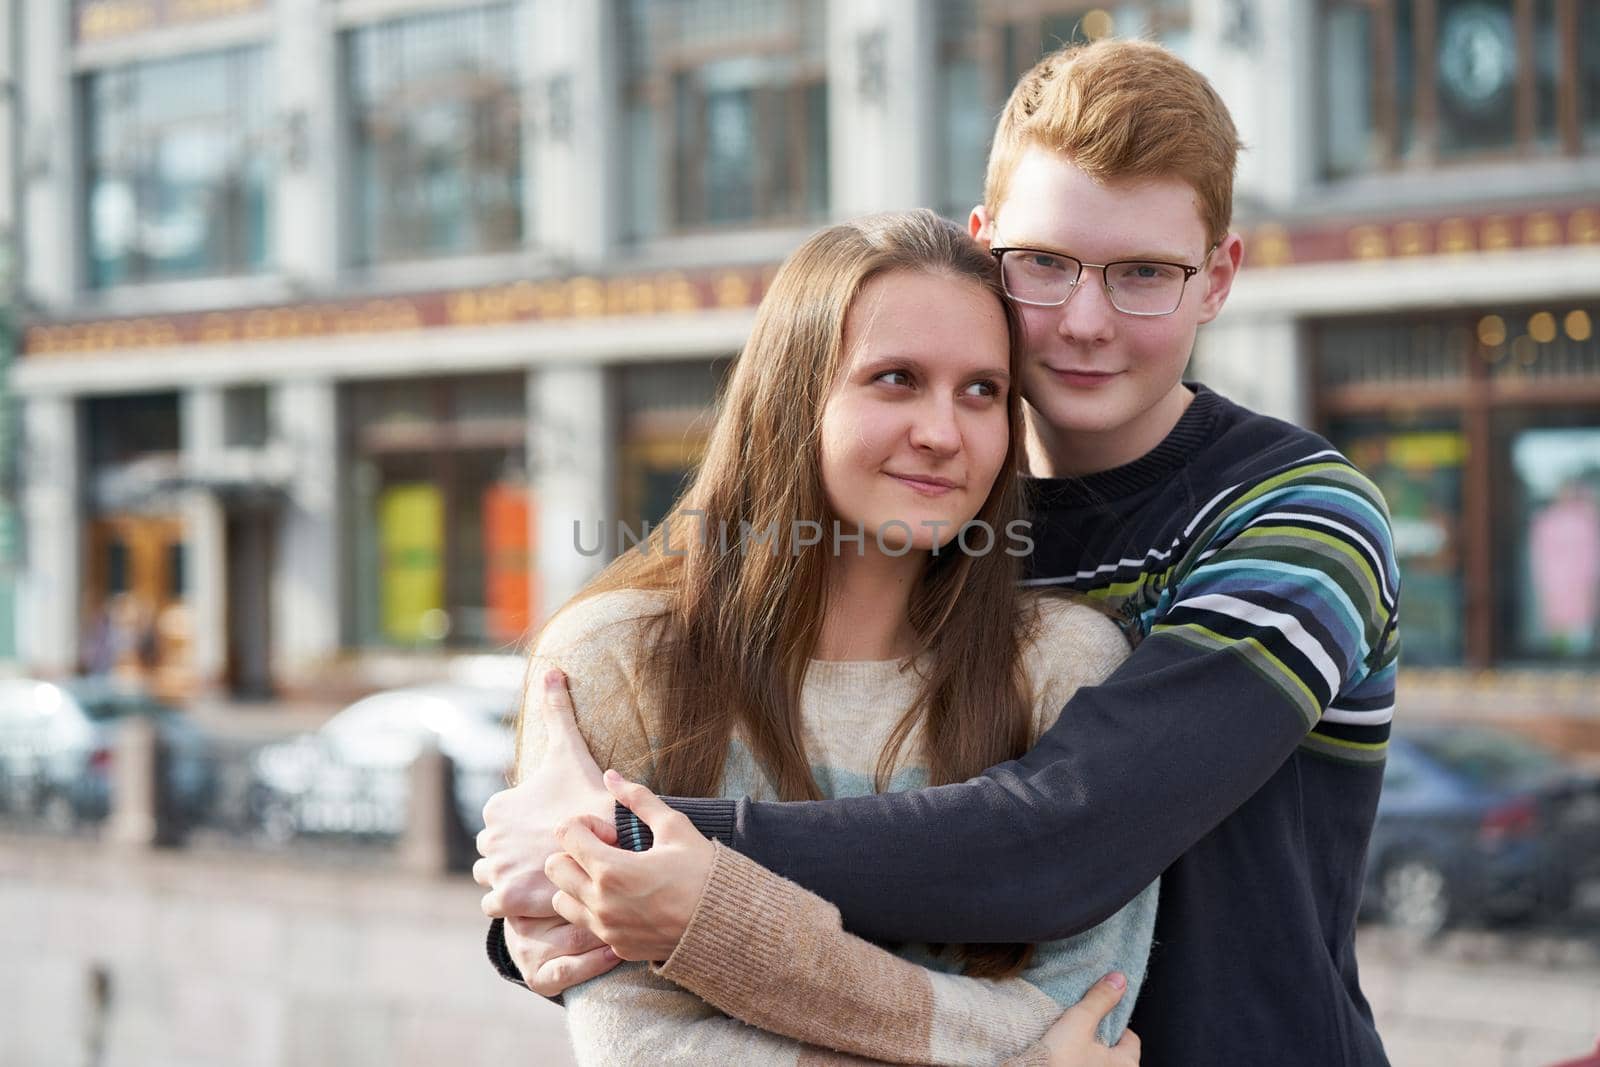 portrait of happy couple embracing in downtown, red-haired man with glasses looking straight, woman with long hair looking away by NataBene